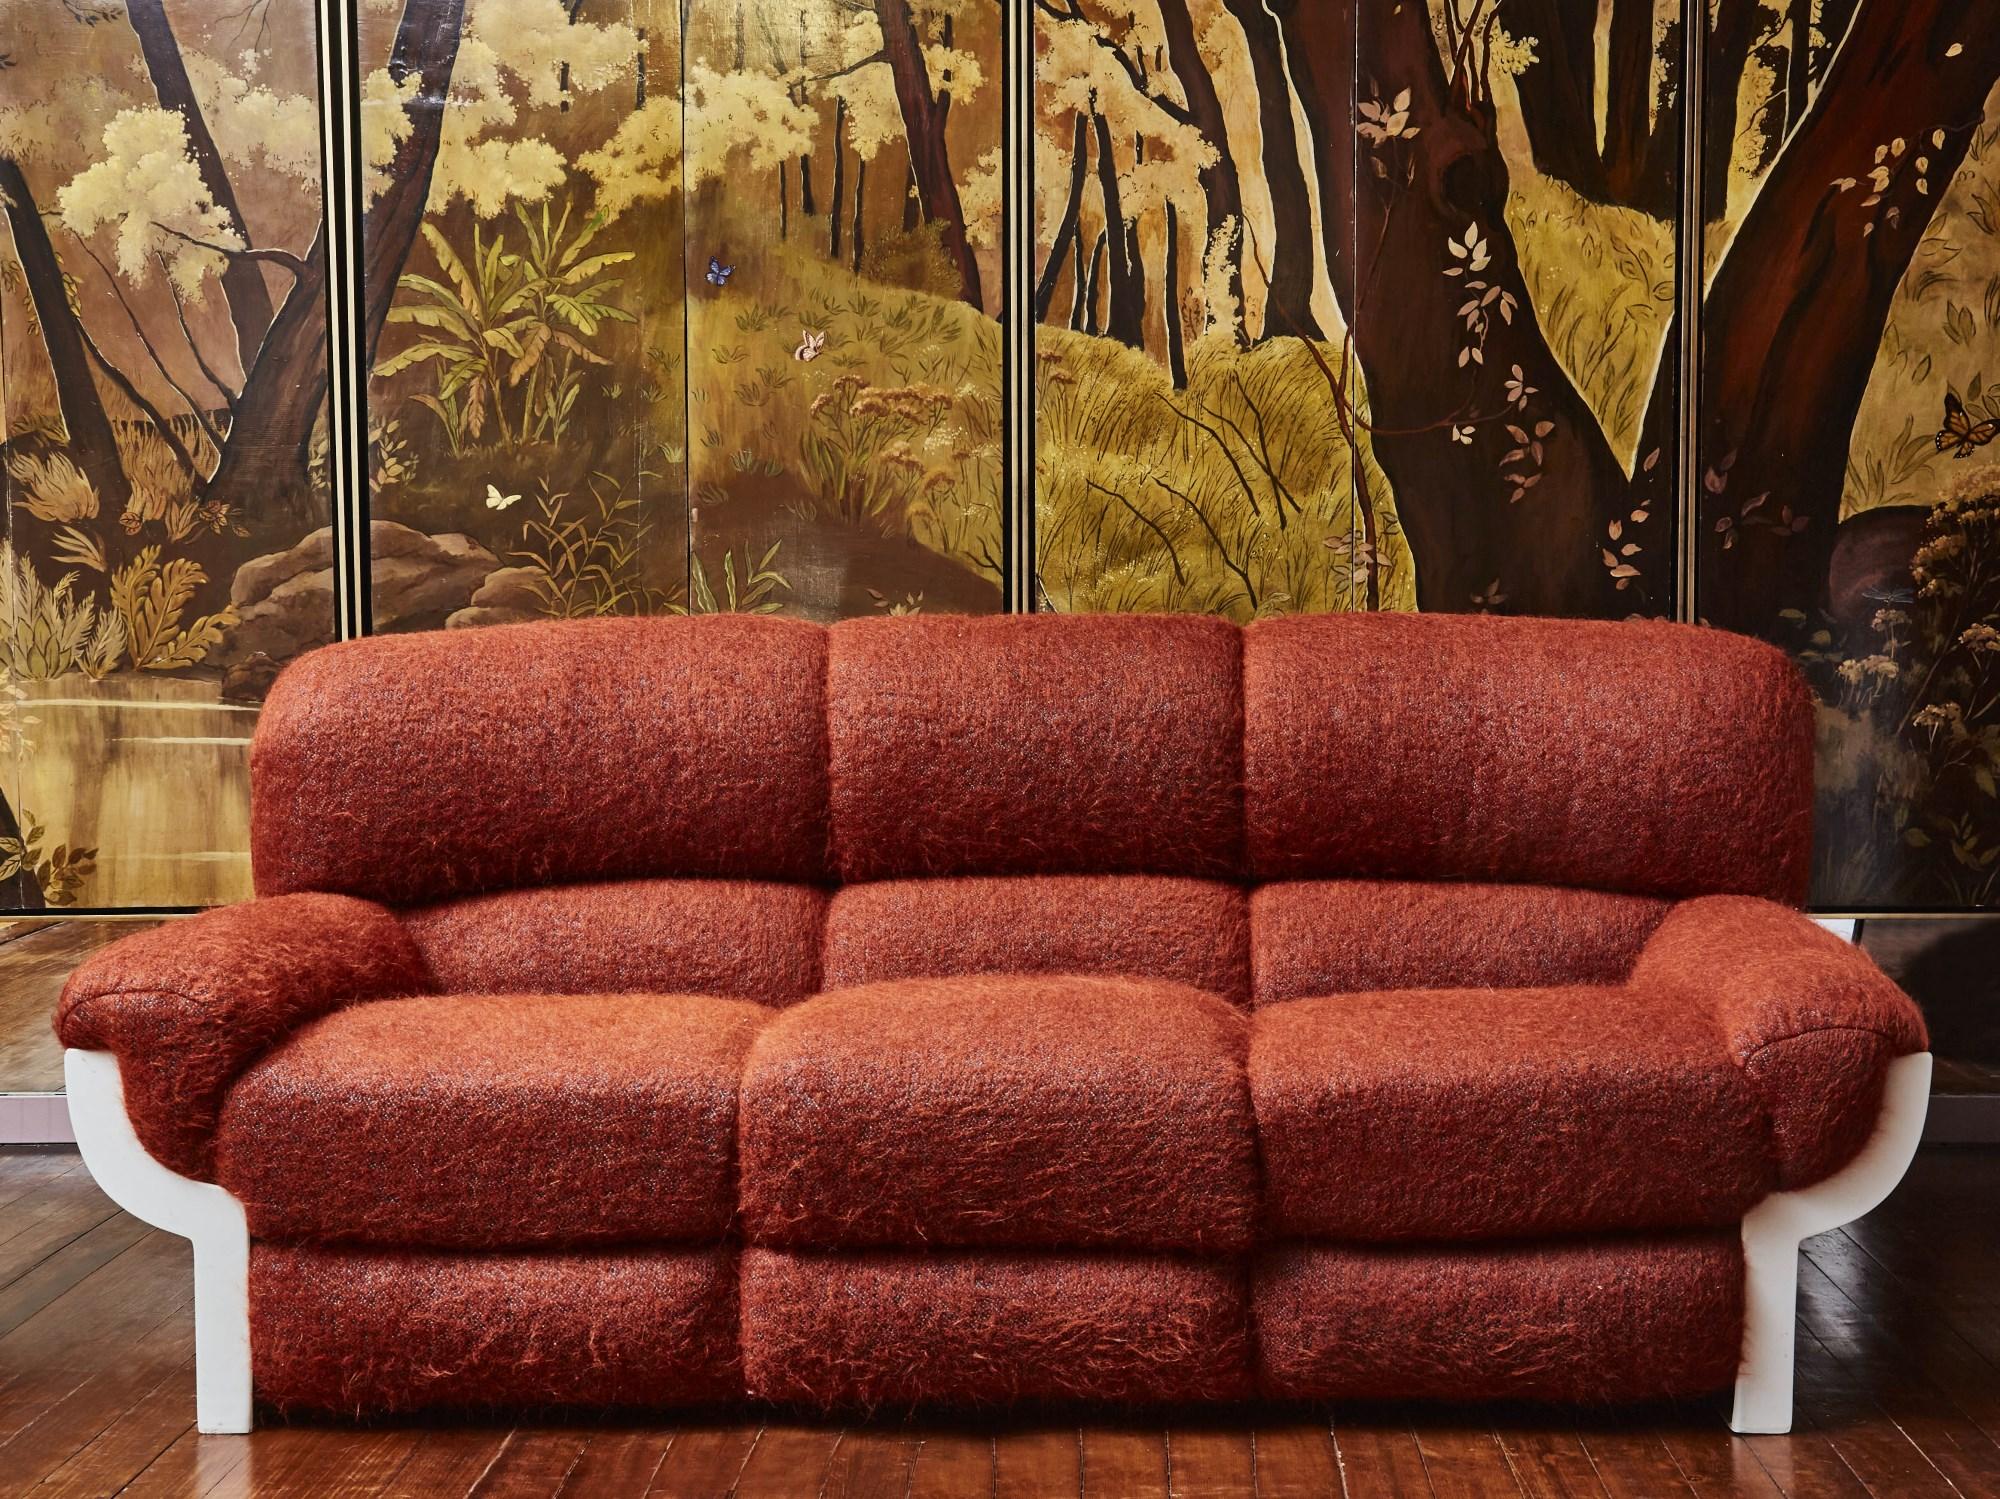 Superb 3 seats sofa in fiberglass entirely reupholstered with a fabric by Pierre Frey.
Italy, 1970s